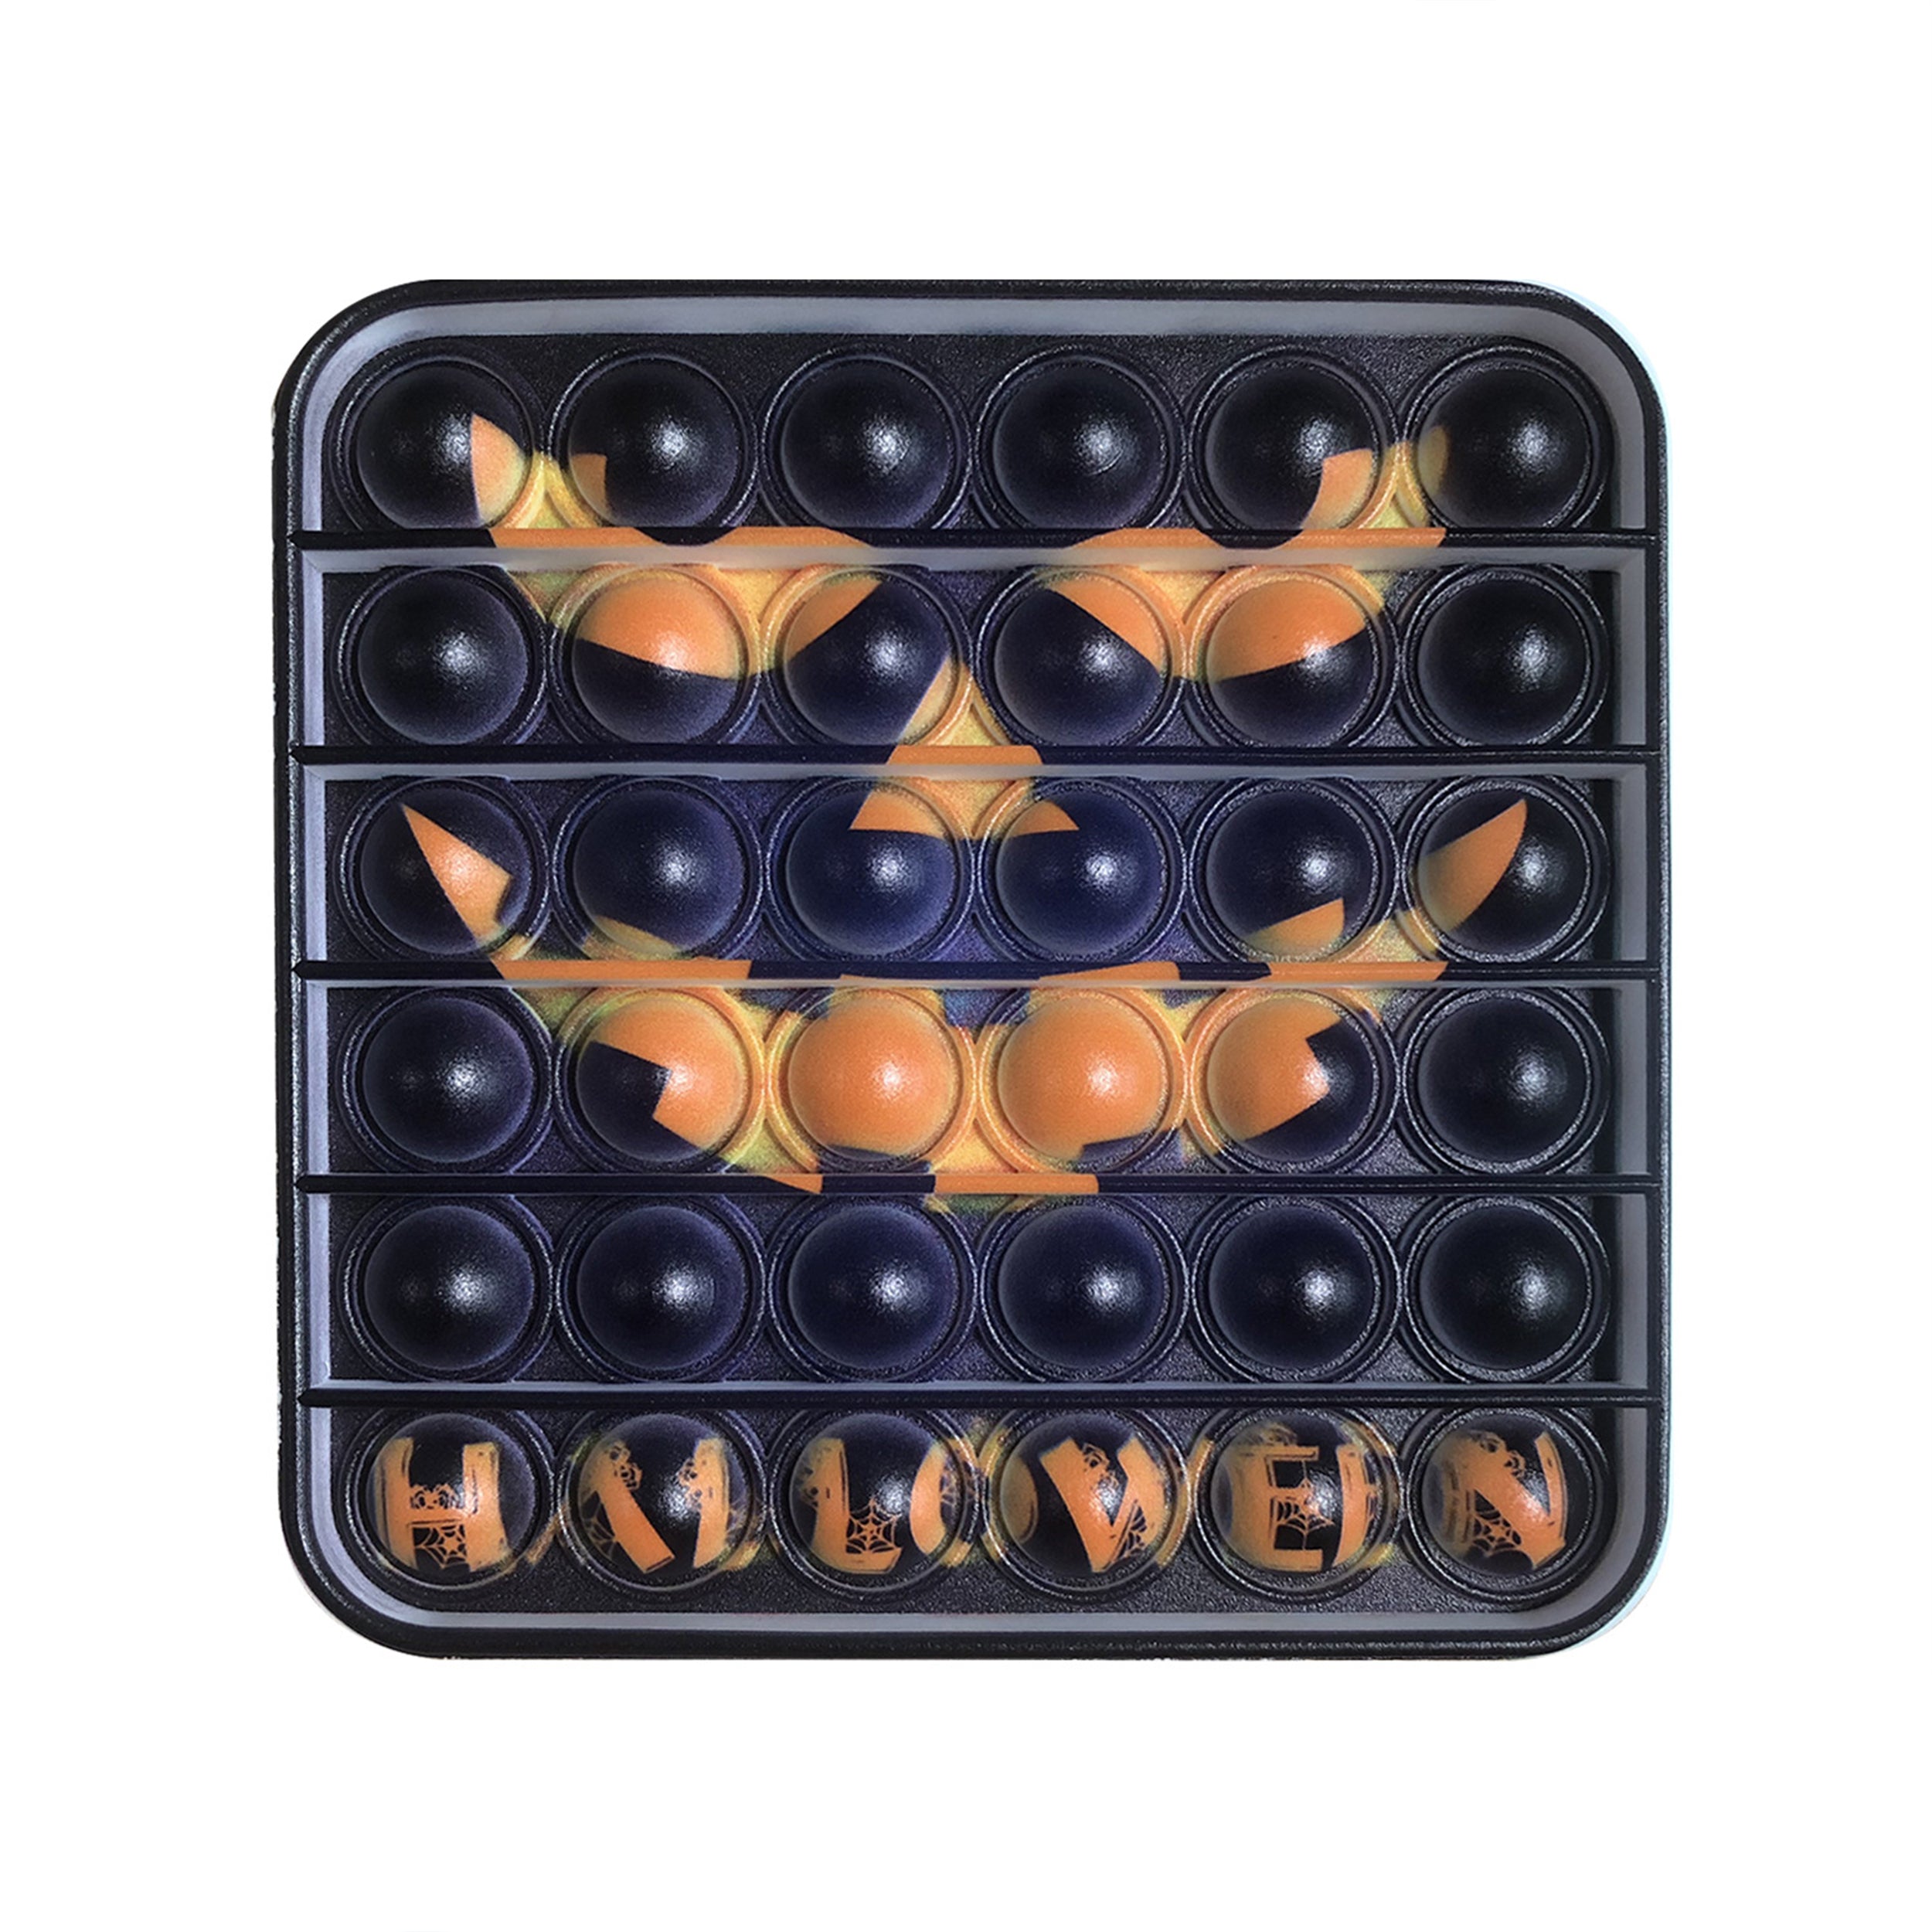 Get Spooky with Halloween Push Bubble Fidget Toys - Perfect for Stress Relief